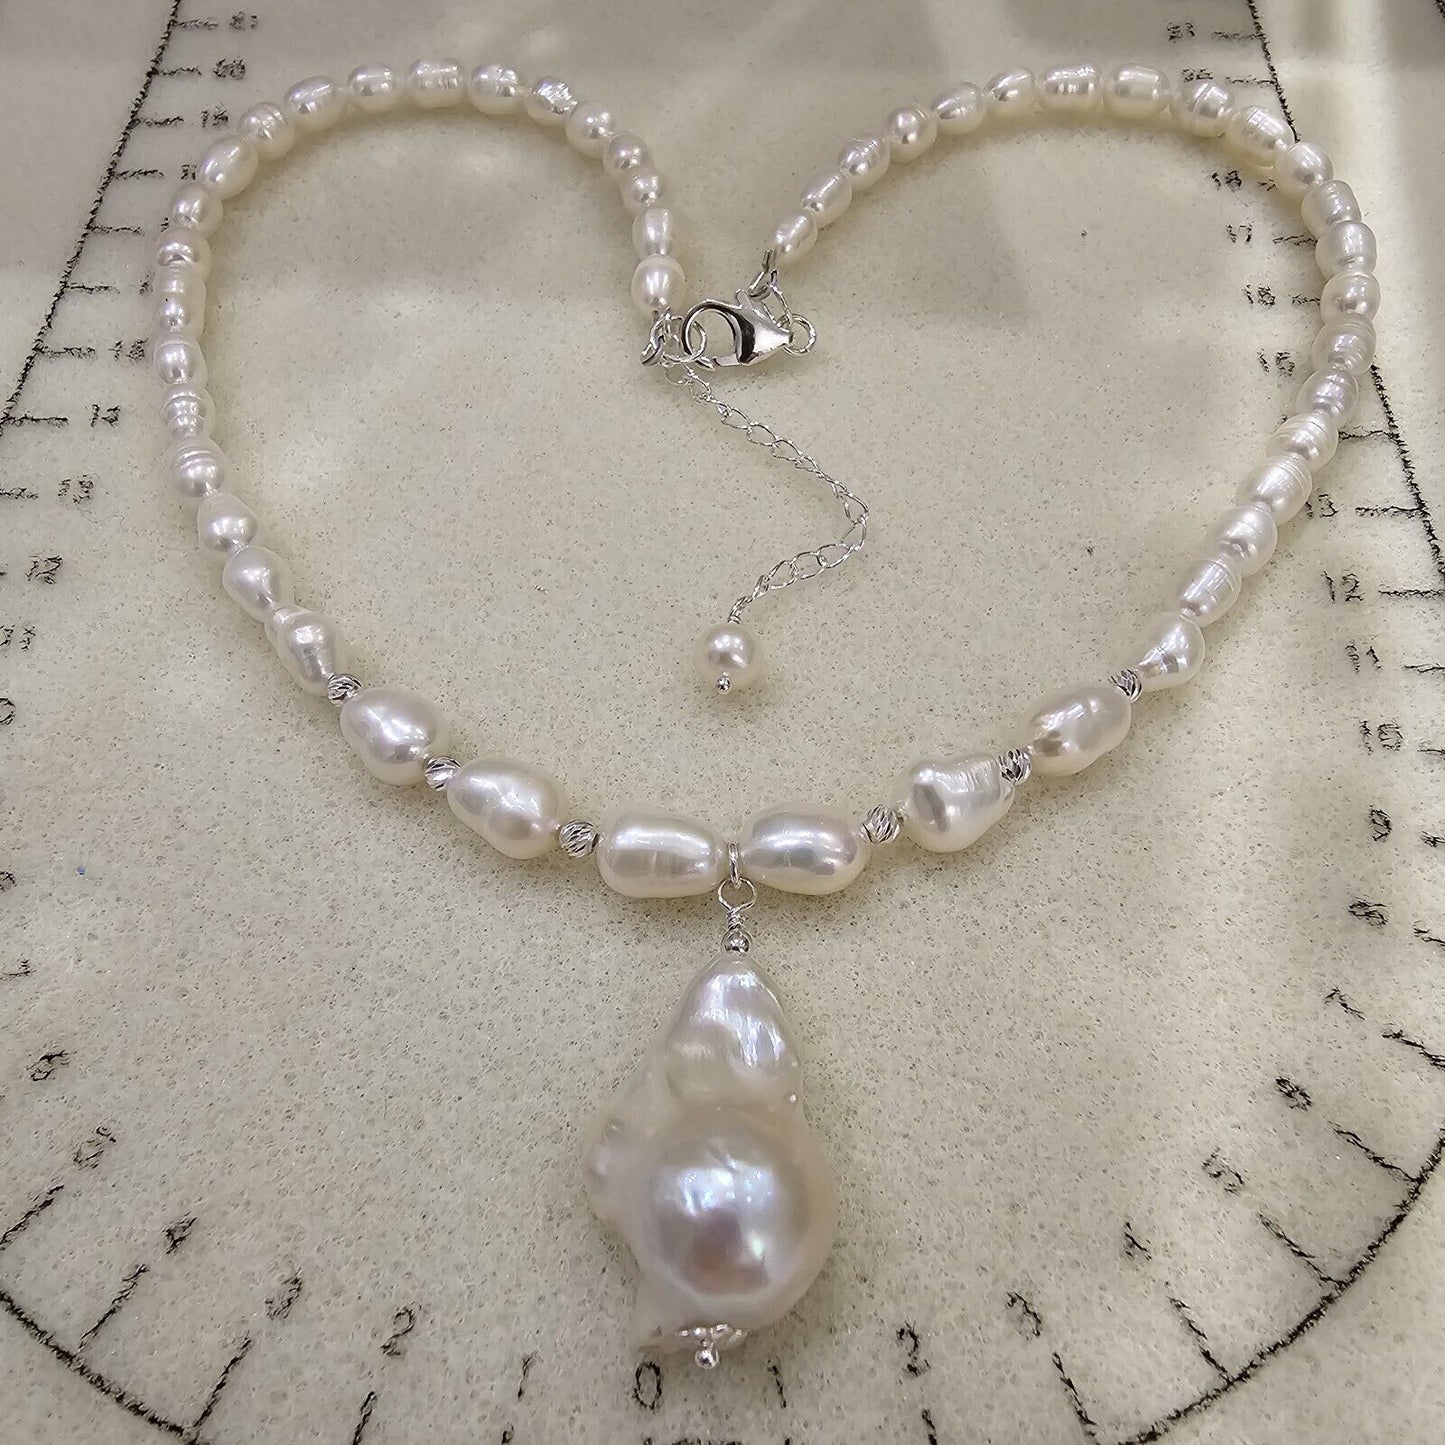 White Freshwater Natural Pearls Necklace, with Big Baroque Drop Pearl Pendant